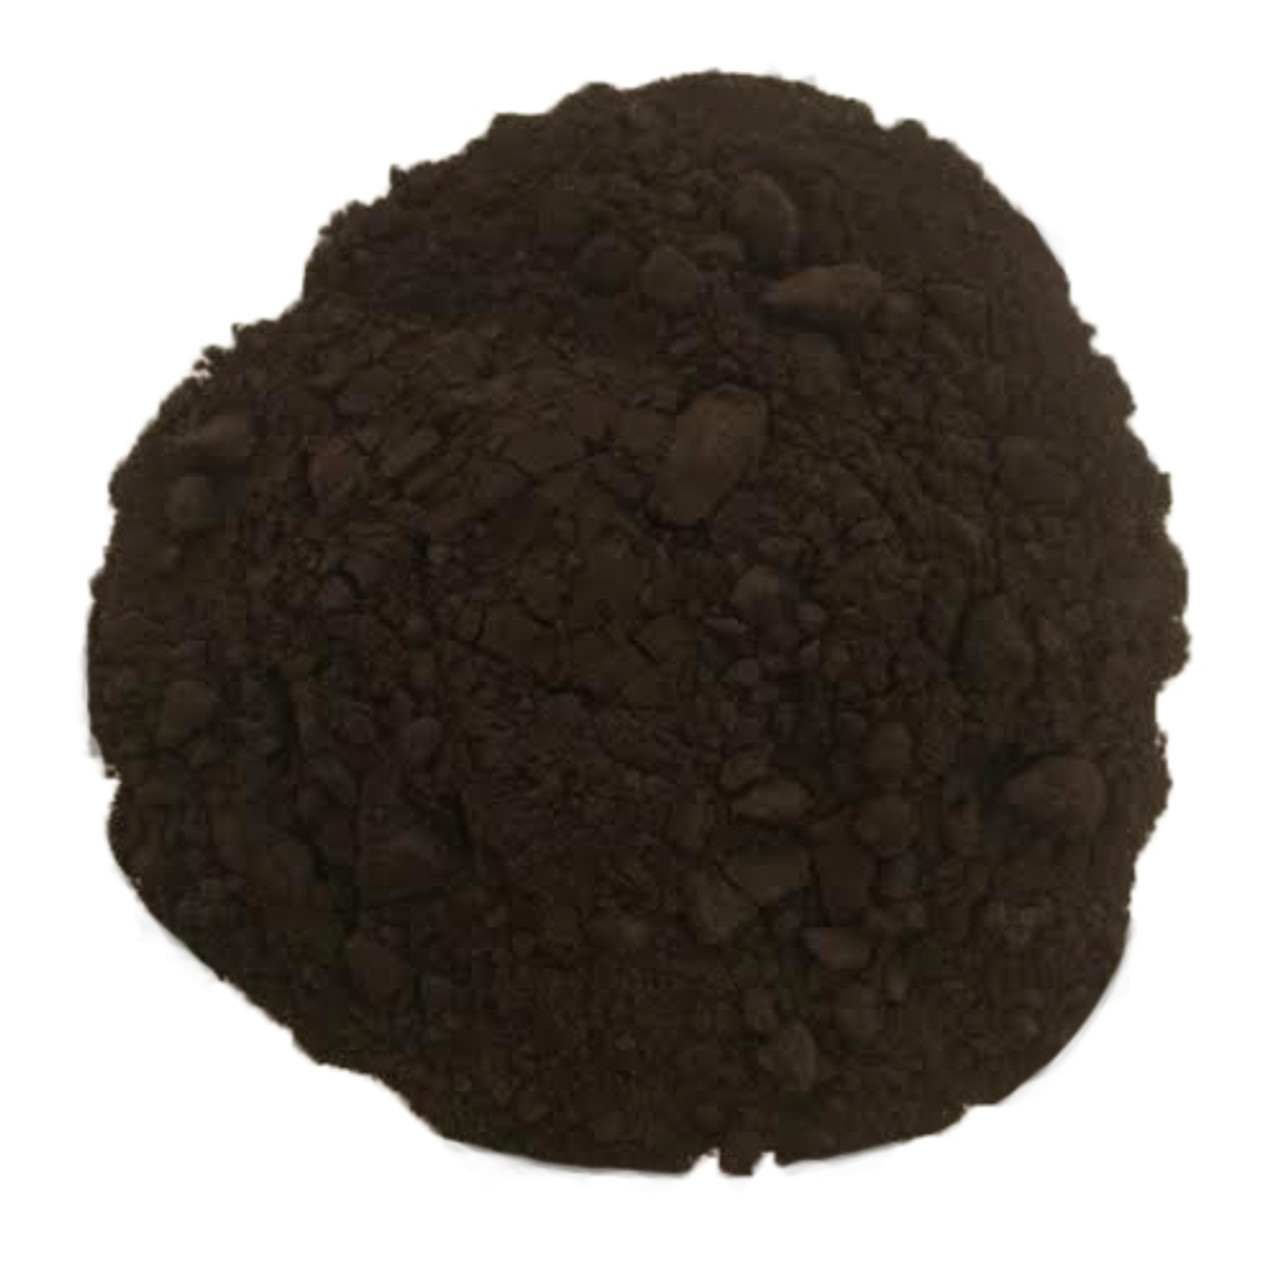 Black Cocoa Powder (1 lb) Bake the Darkest Chocolate Baked Goods, Achieve  Rich Chocolate Flavor, All-Natural Substitute for Black Food Coloring